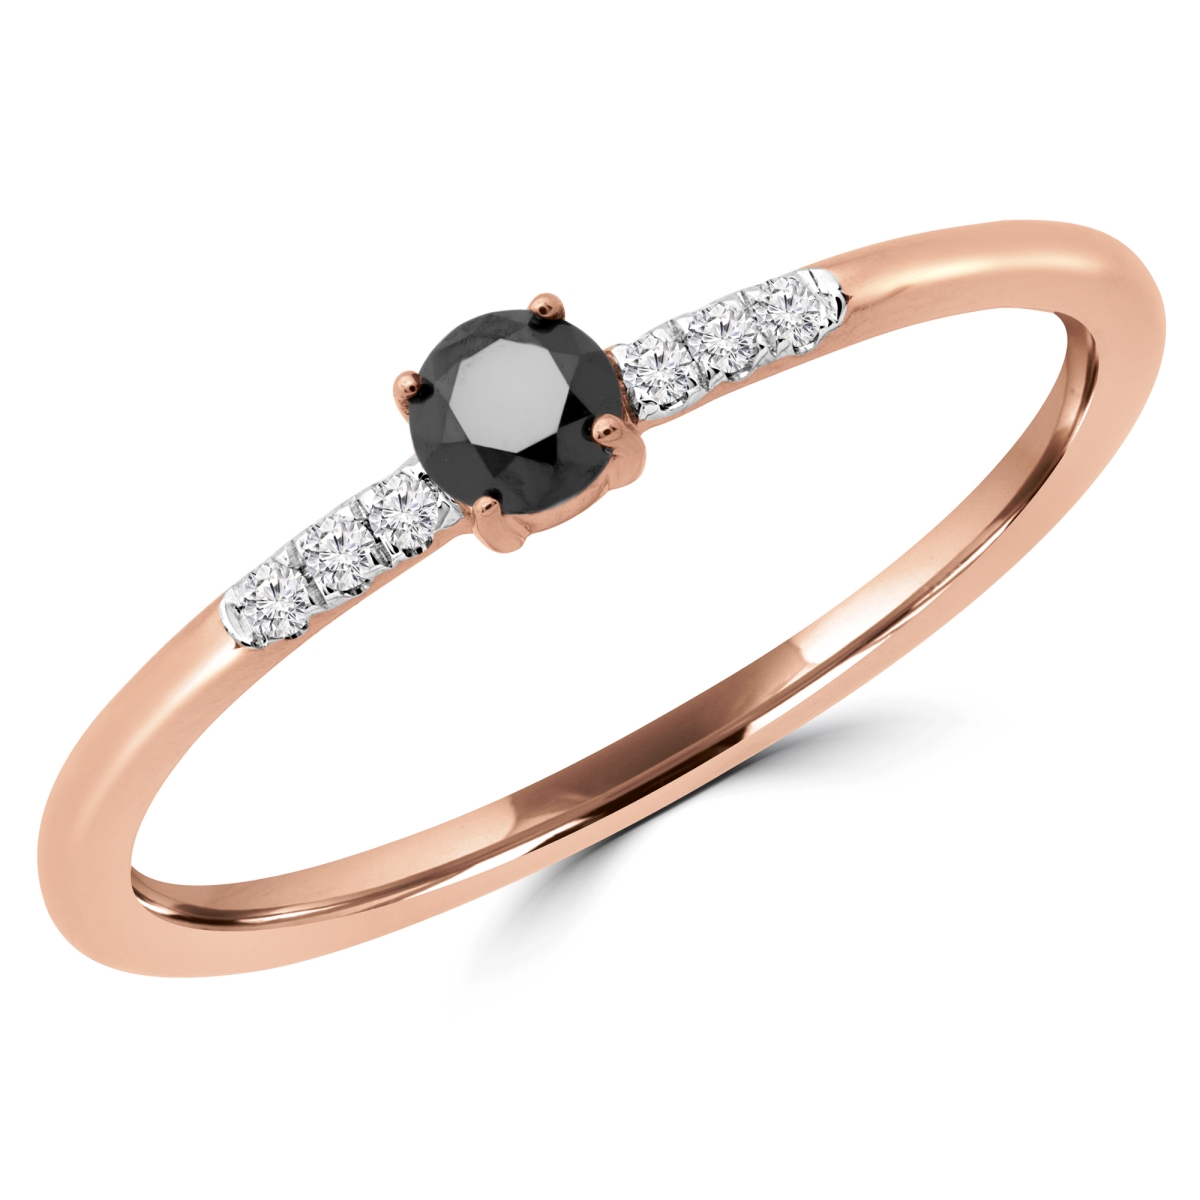 Picture of Majesty Diamonds MDR190079-8 0.16 CTW Round Black Diamond Bezel Set Cocktail Ring in 14K Rose Gold - Size 8